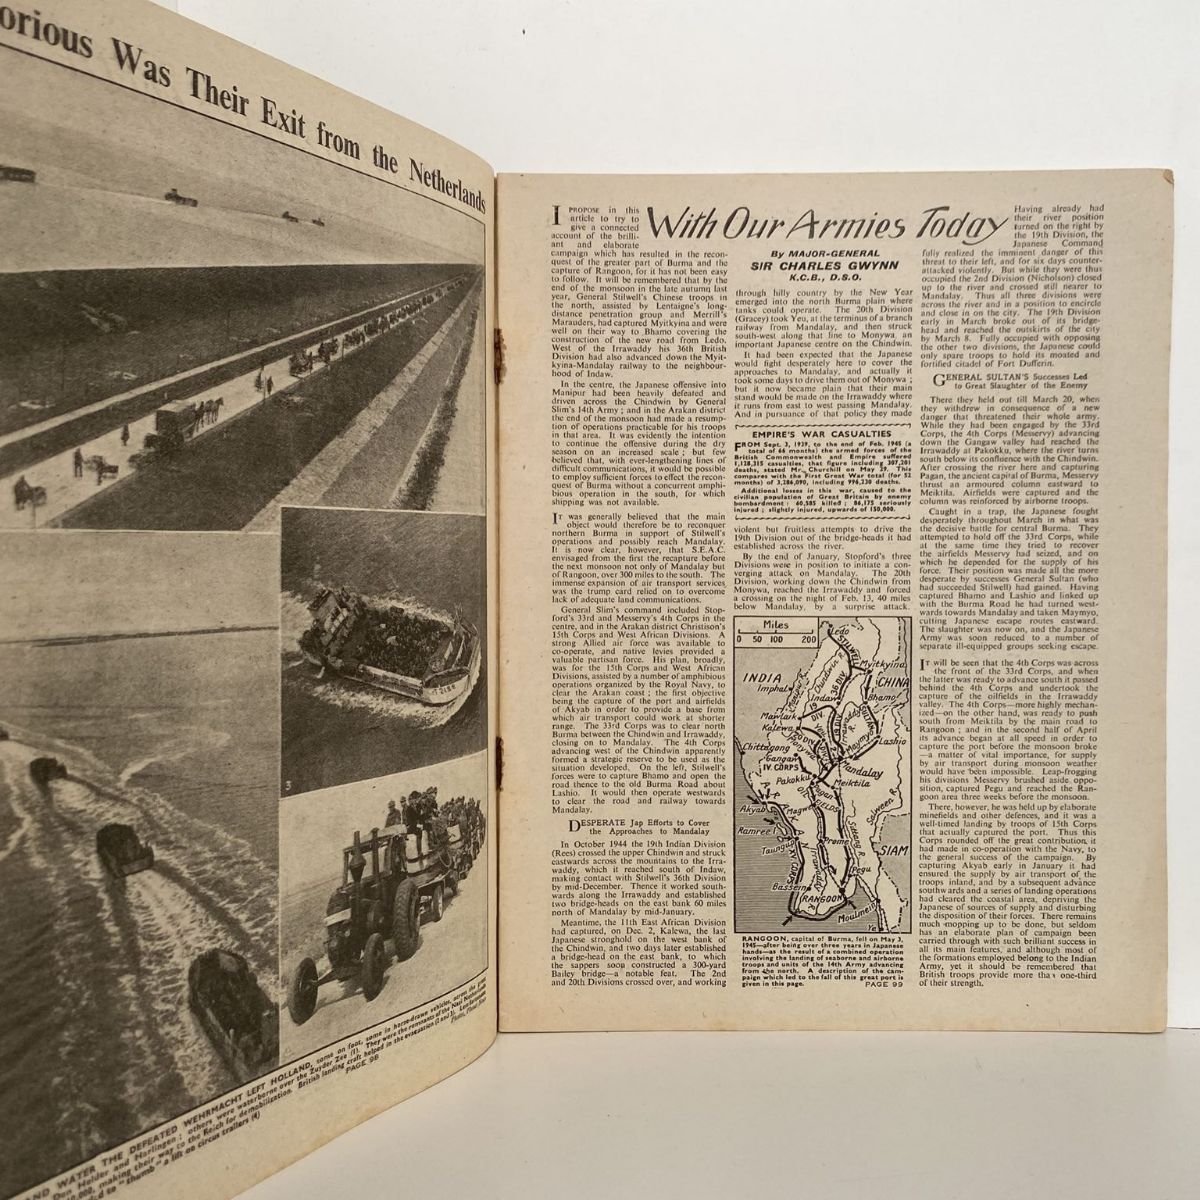 THE WAR ILLUSTRATED - Vol 9, No 209, 22nd June 1945